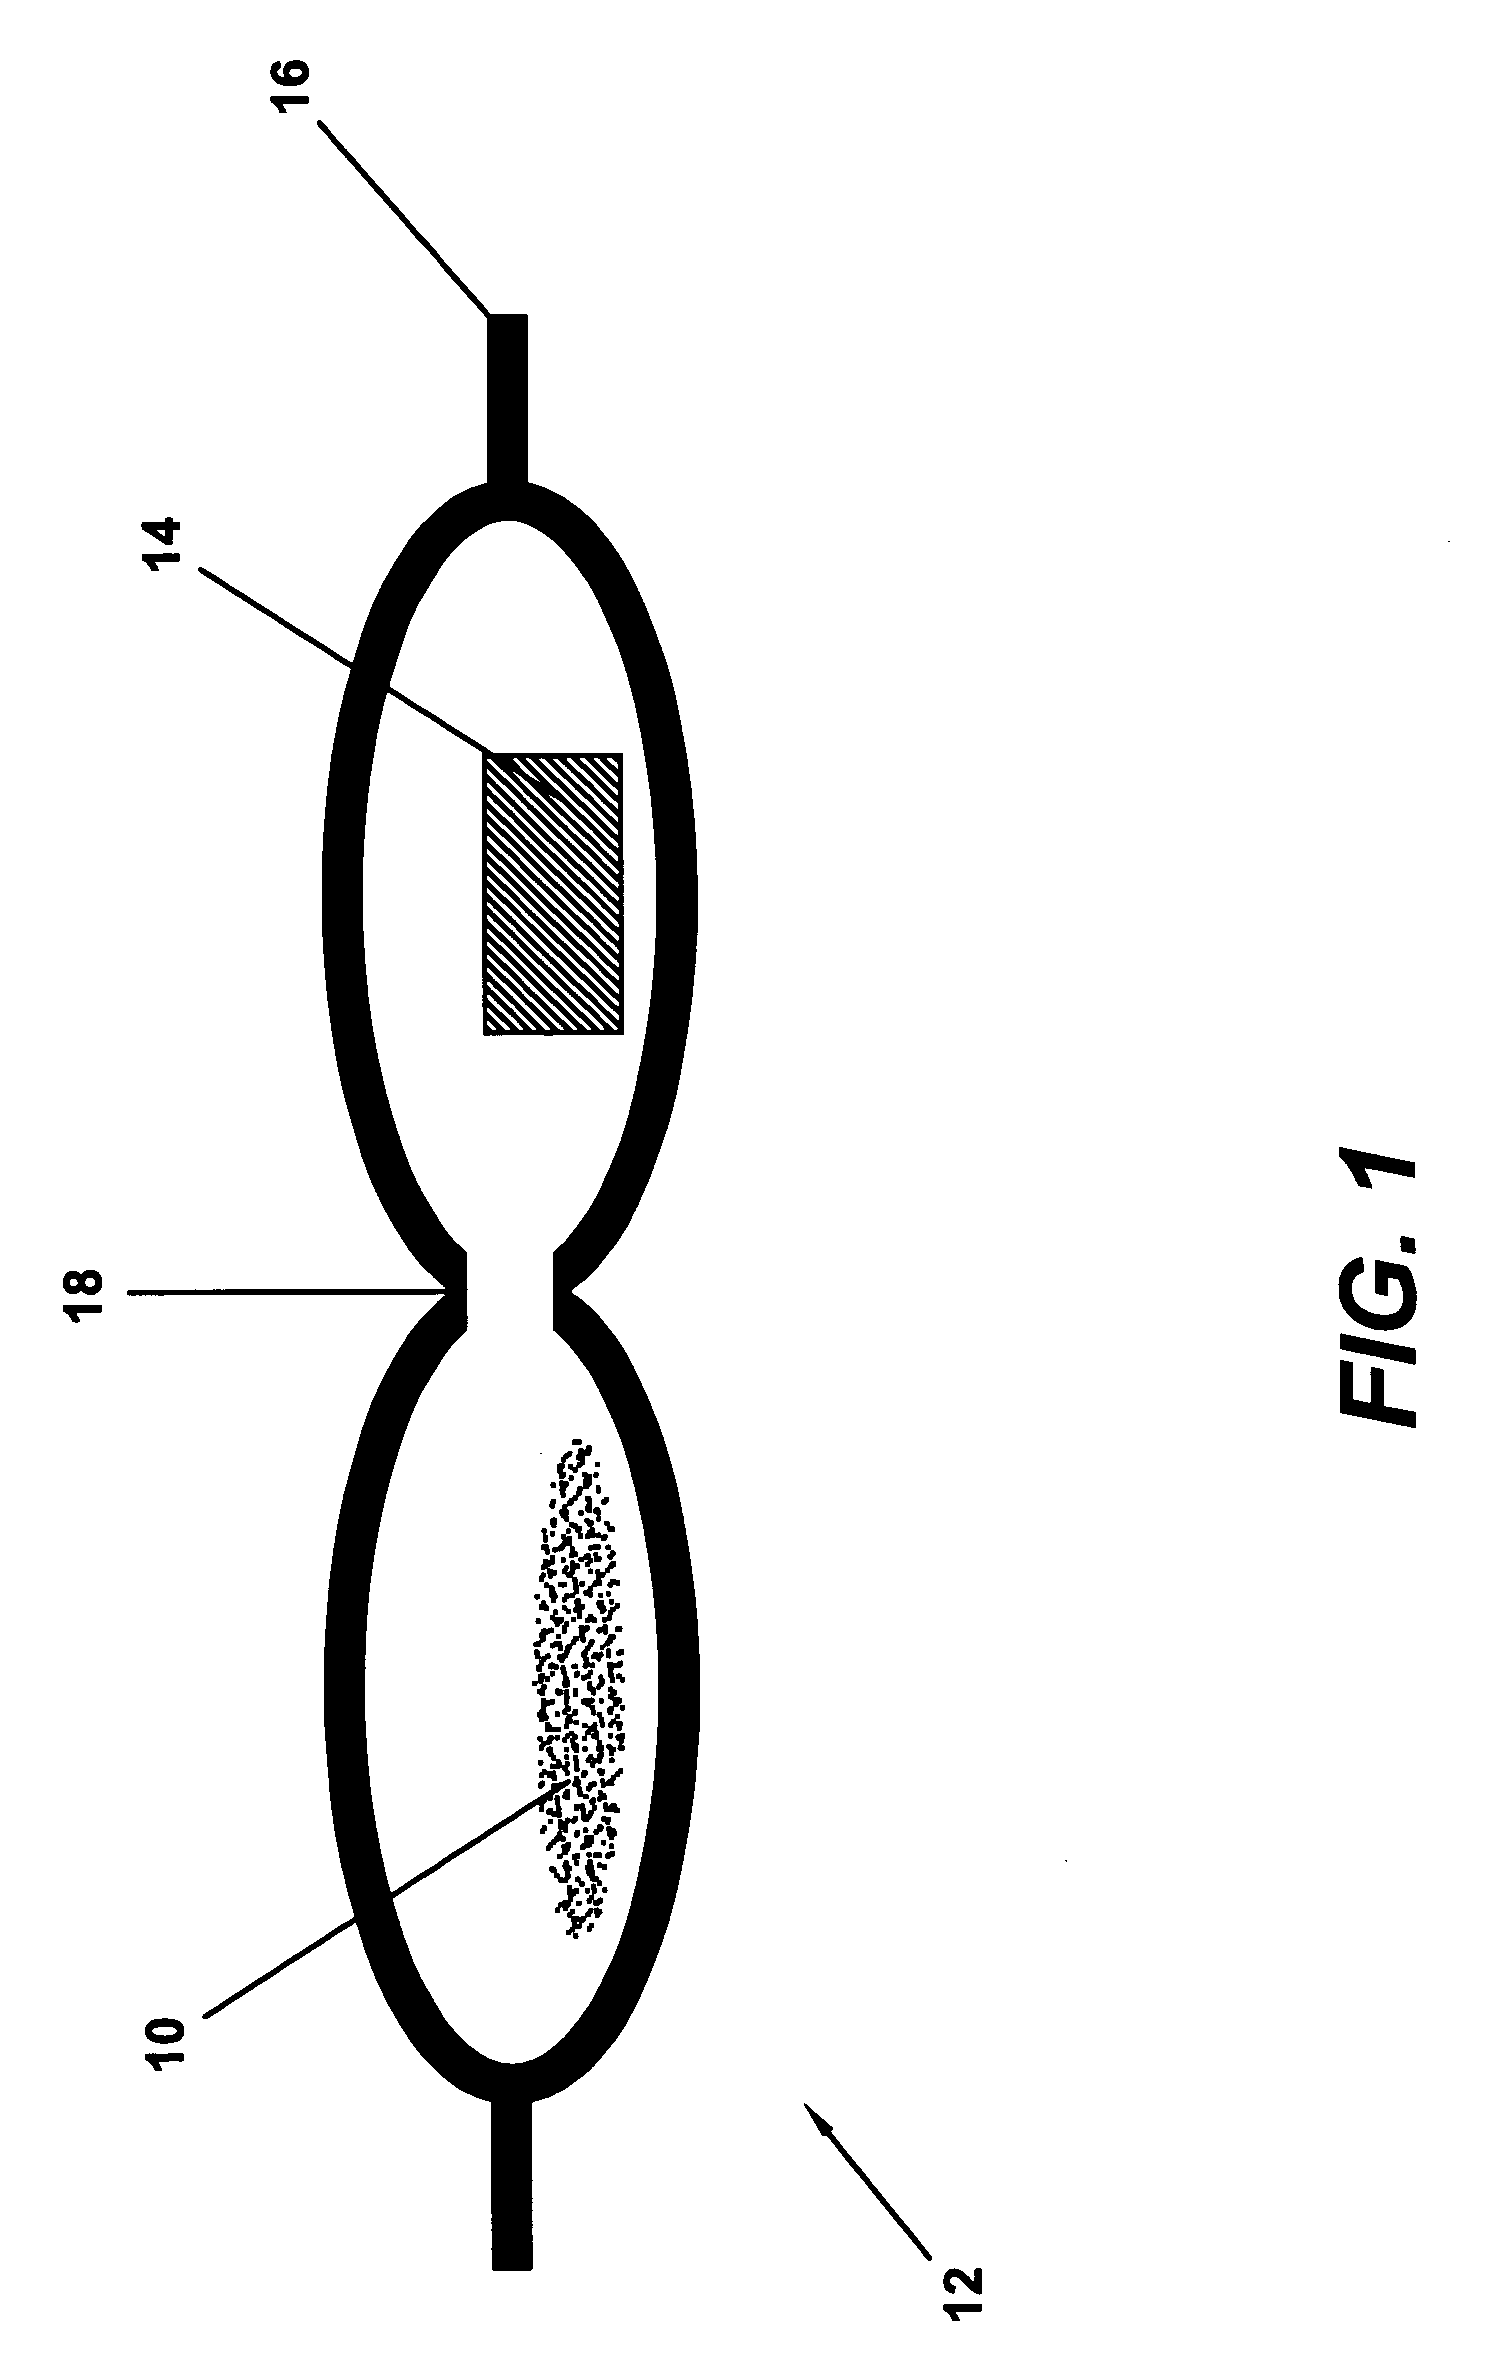 Shaped microcomponents via reactive conversion of biologically-derived microtemplates